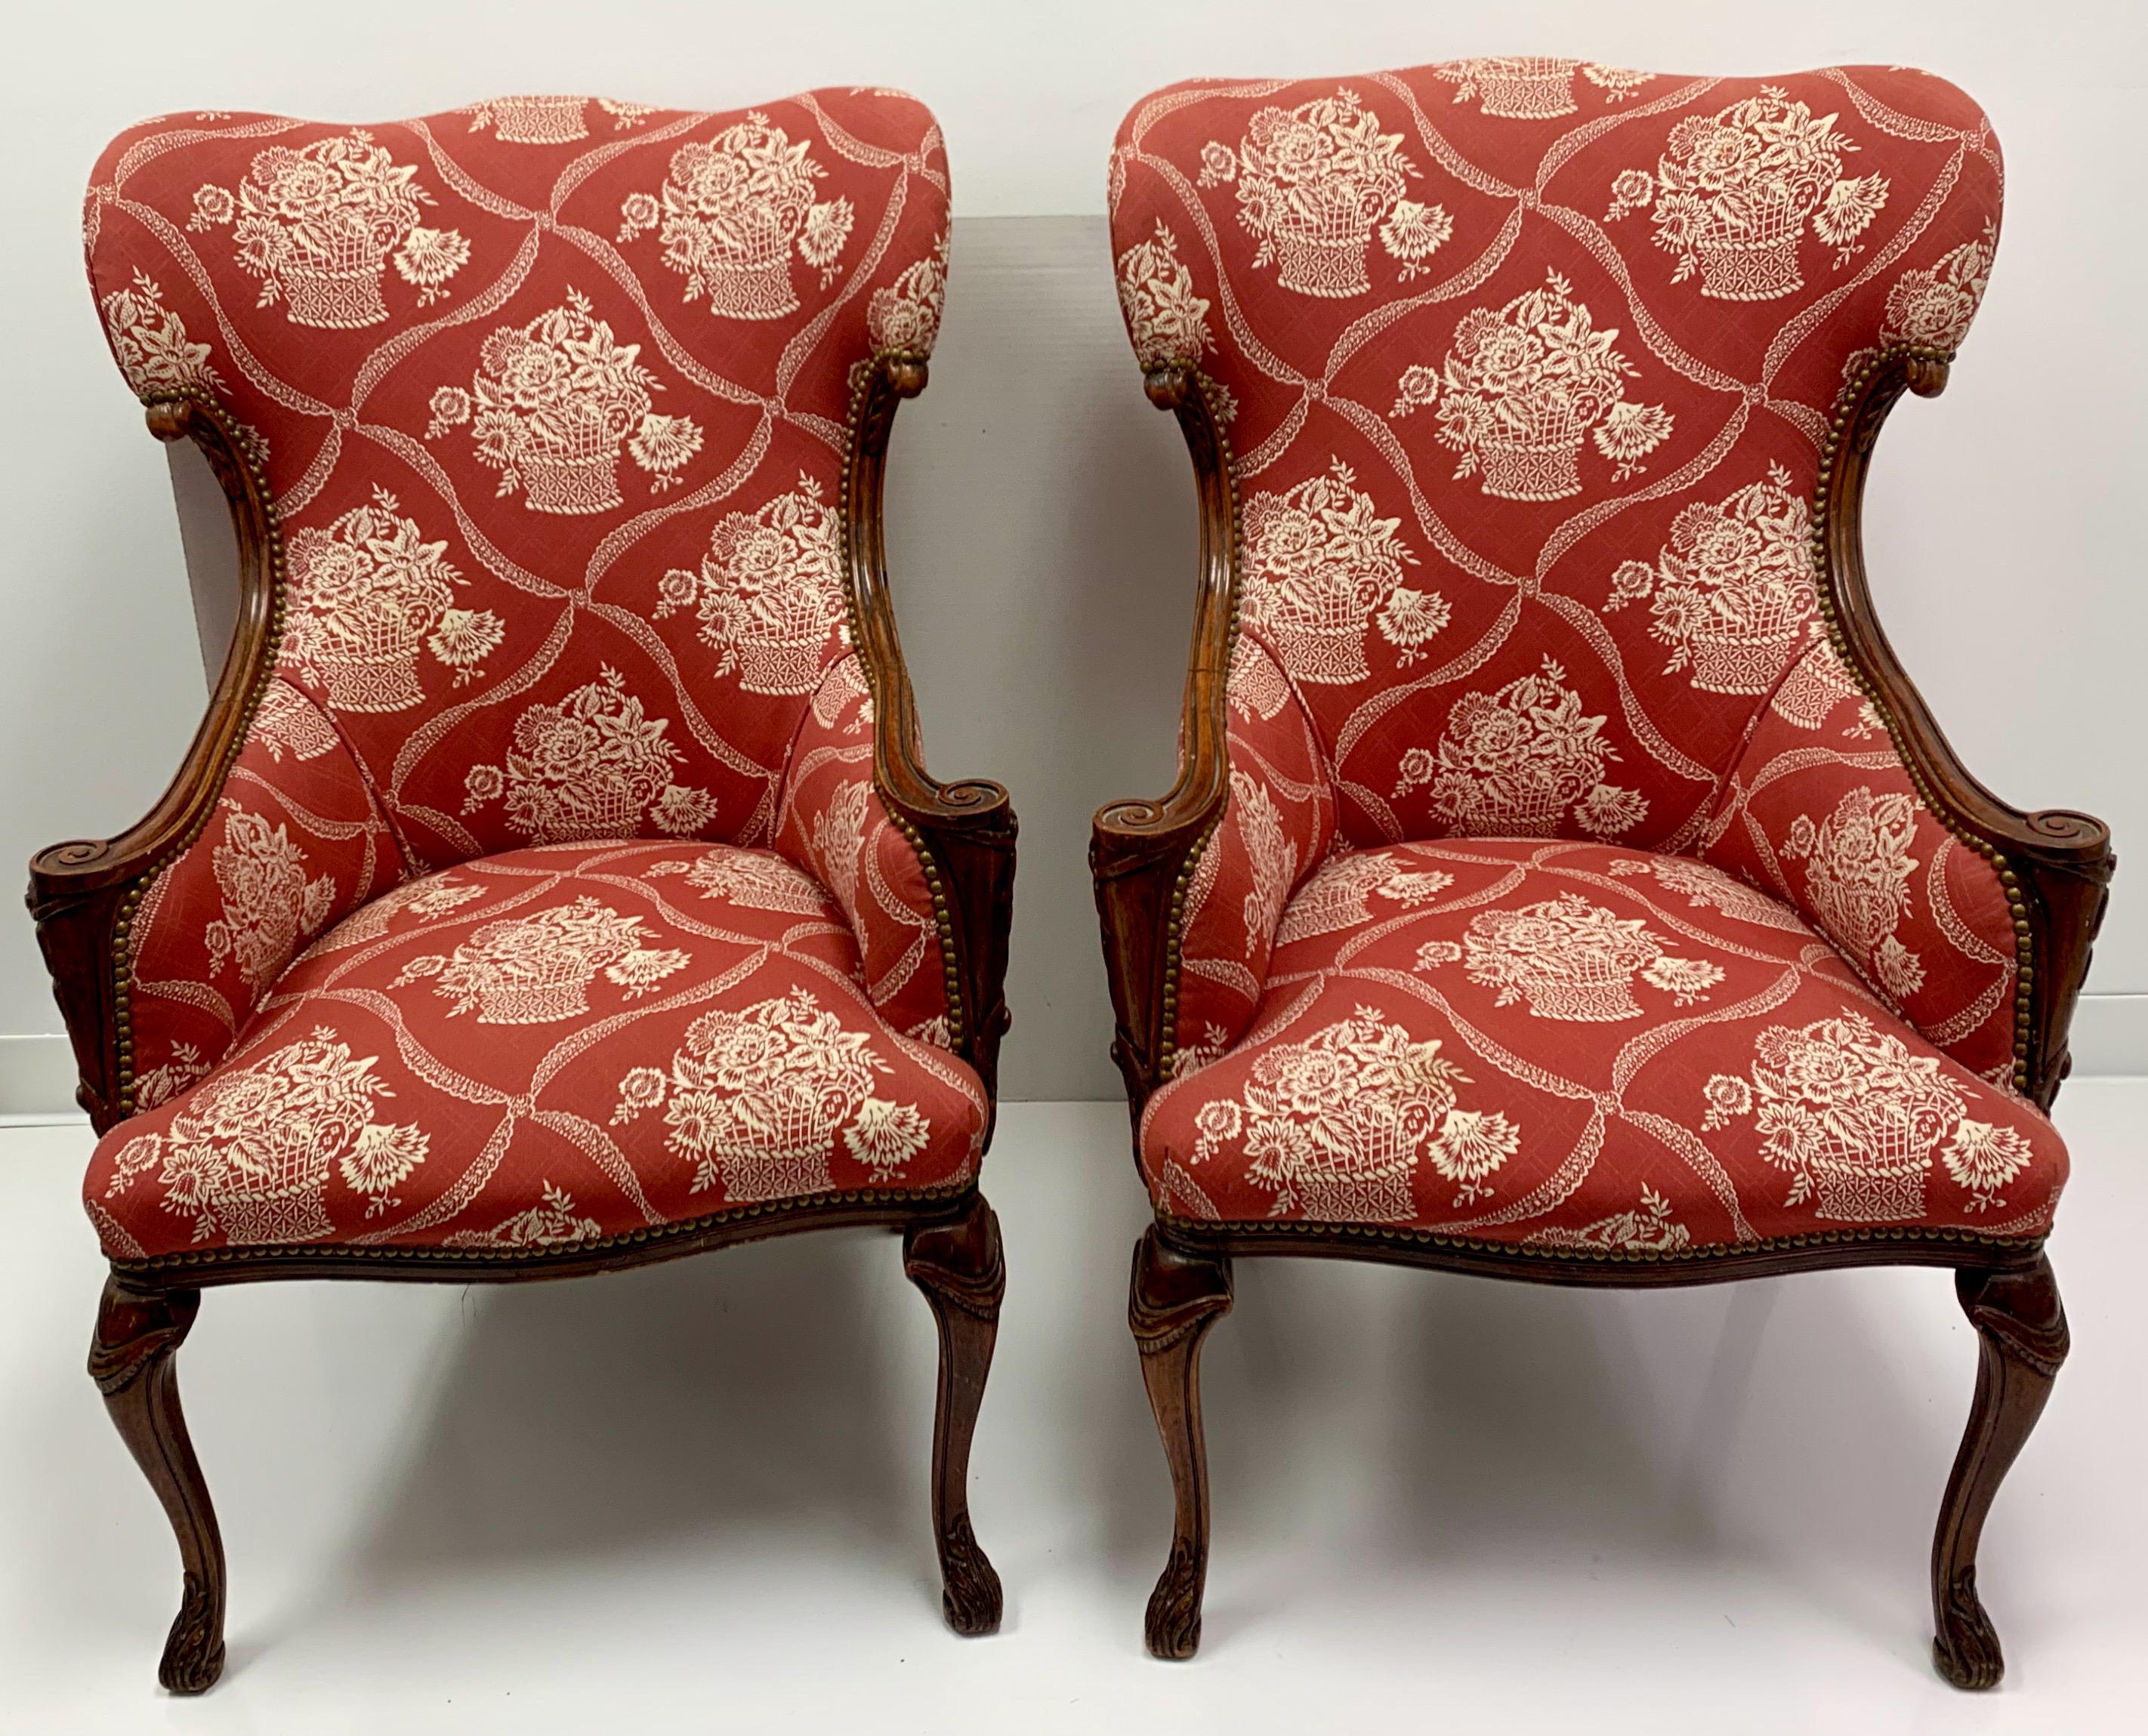 Brass Antique French Carved Mahogany Wing Chairs in Schumacher Fabric, Pair For Sale